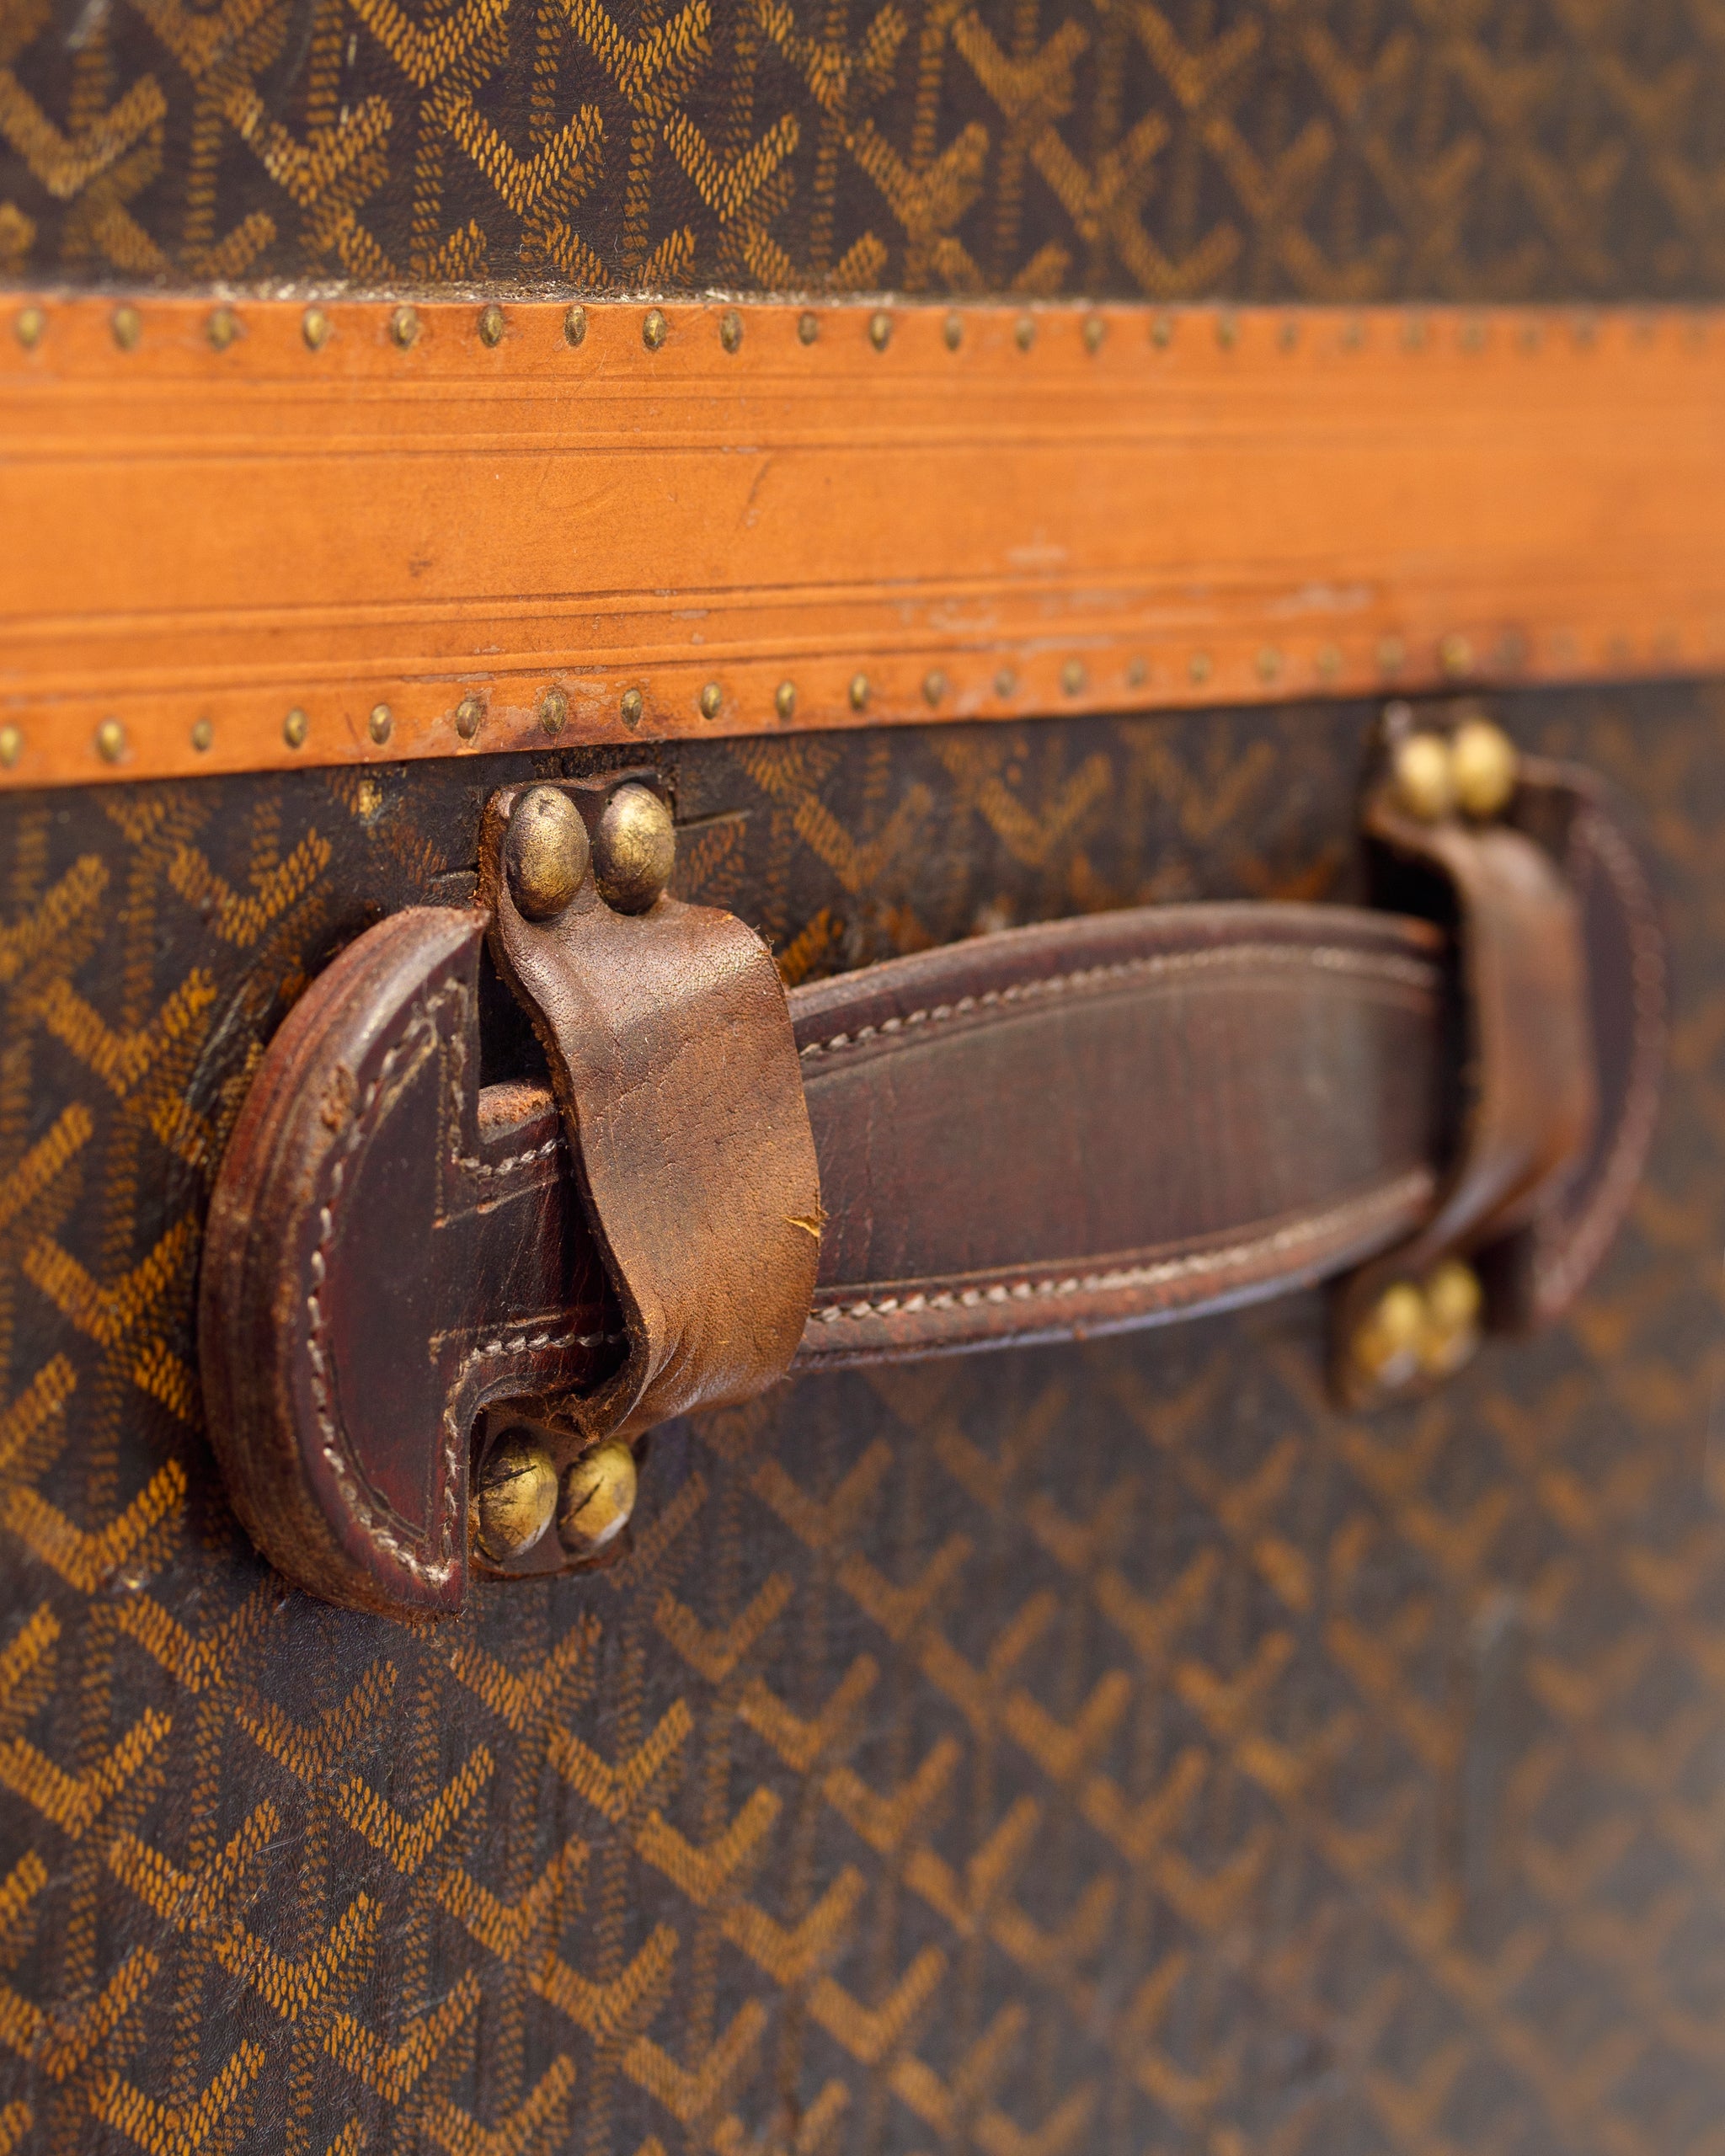 Leather Steamer Trunk with Key from Goyard, 1893